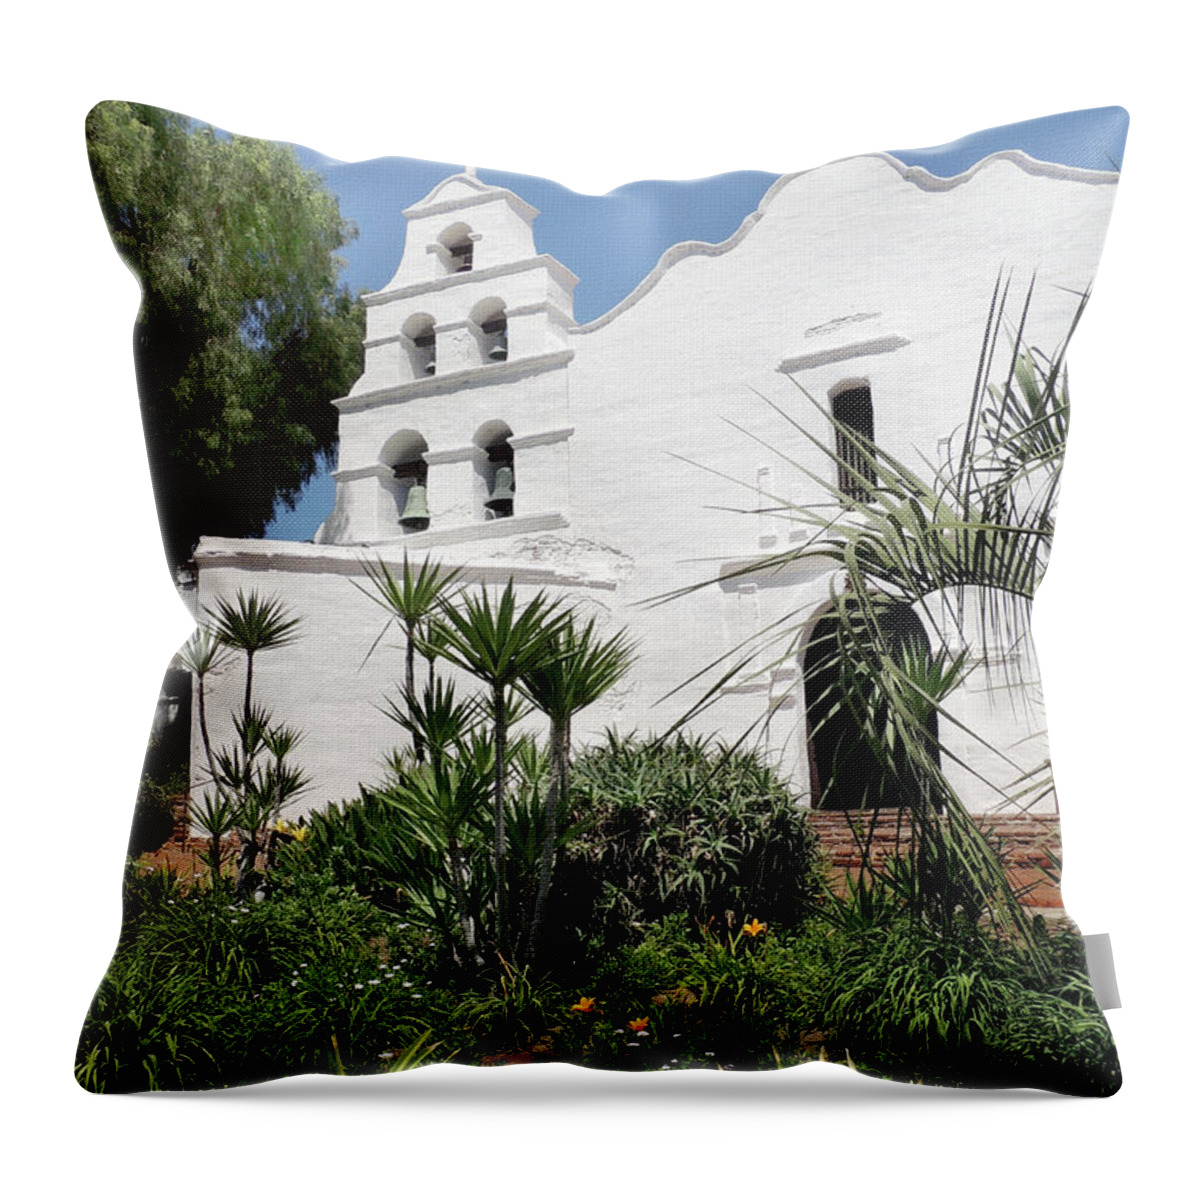 Old Throw Pillow featuring the photograph Old Mission San Diego by Gordon Beck